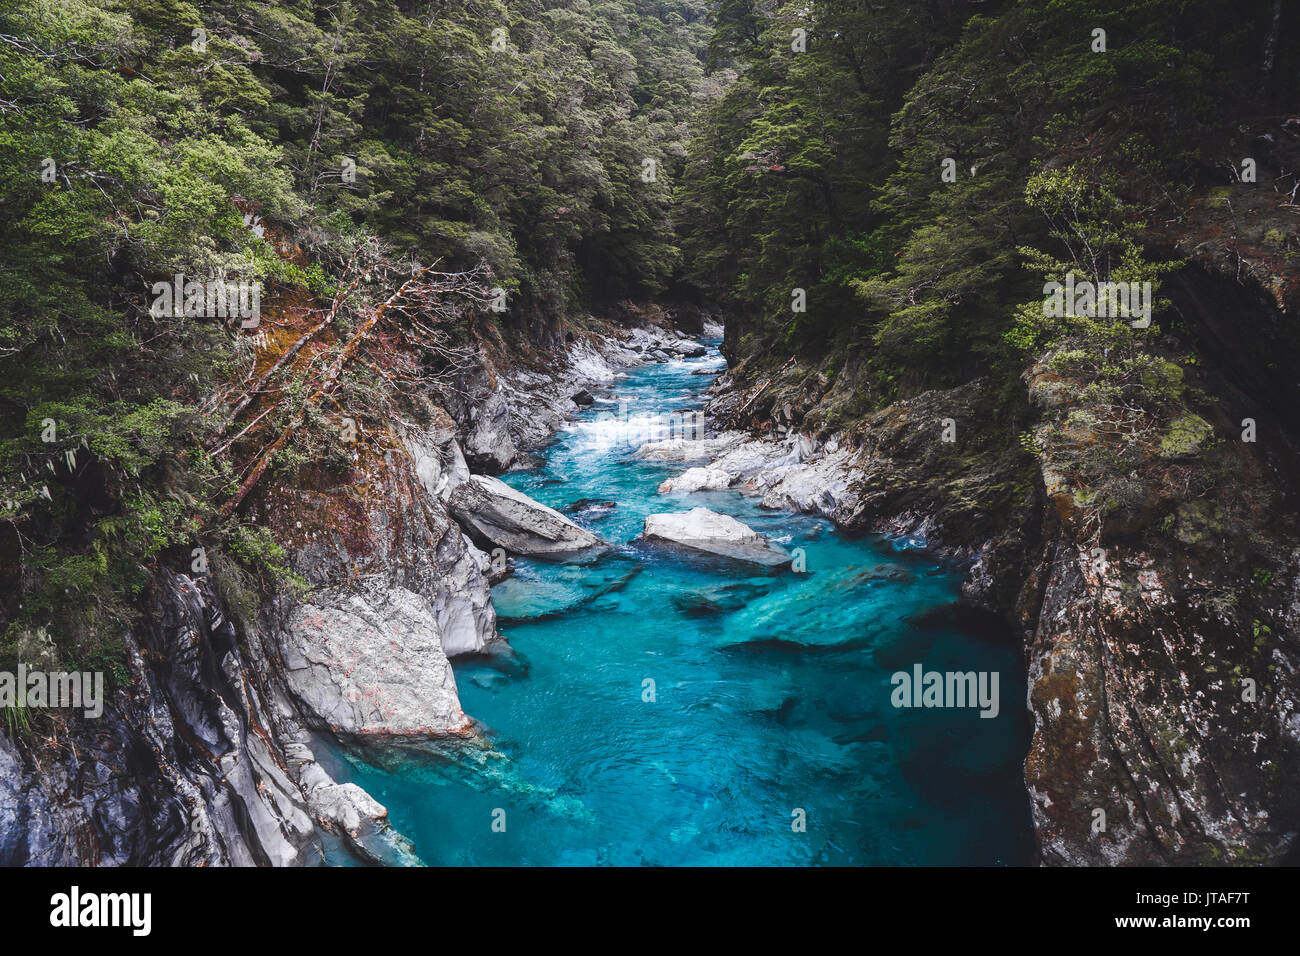 Blue Pools, Mount Aspiring National Park, Southern Alps, UNESCO World Heritage Site, South Island, New Zealand, Pacific Stock Photo